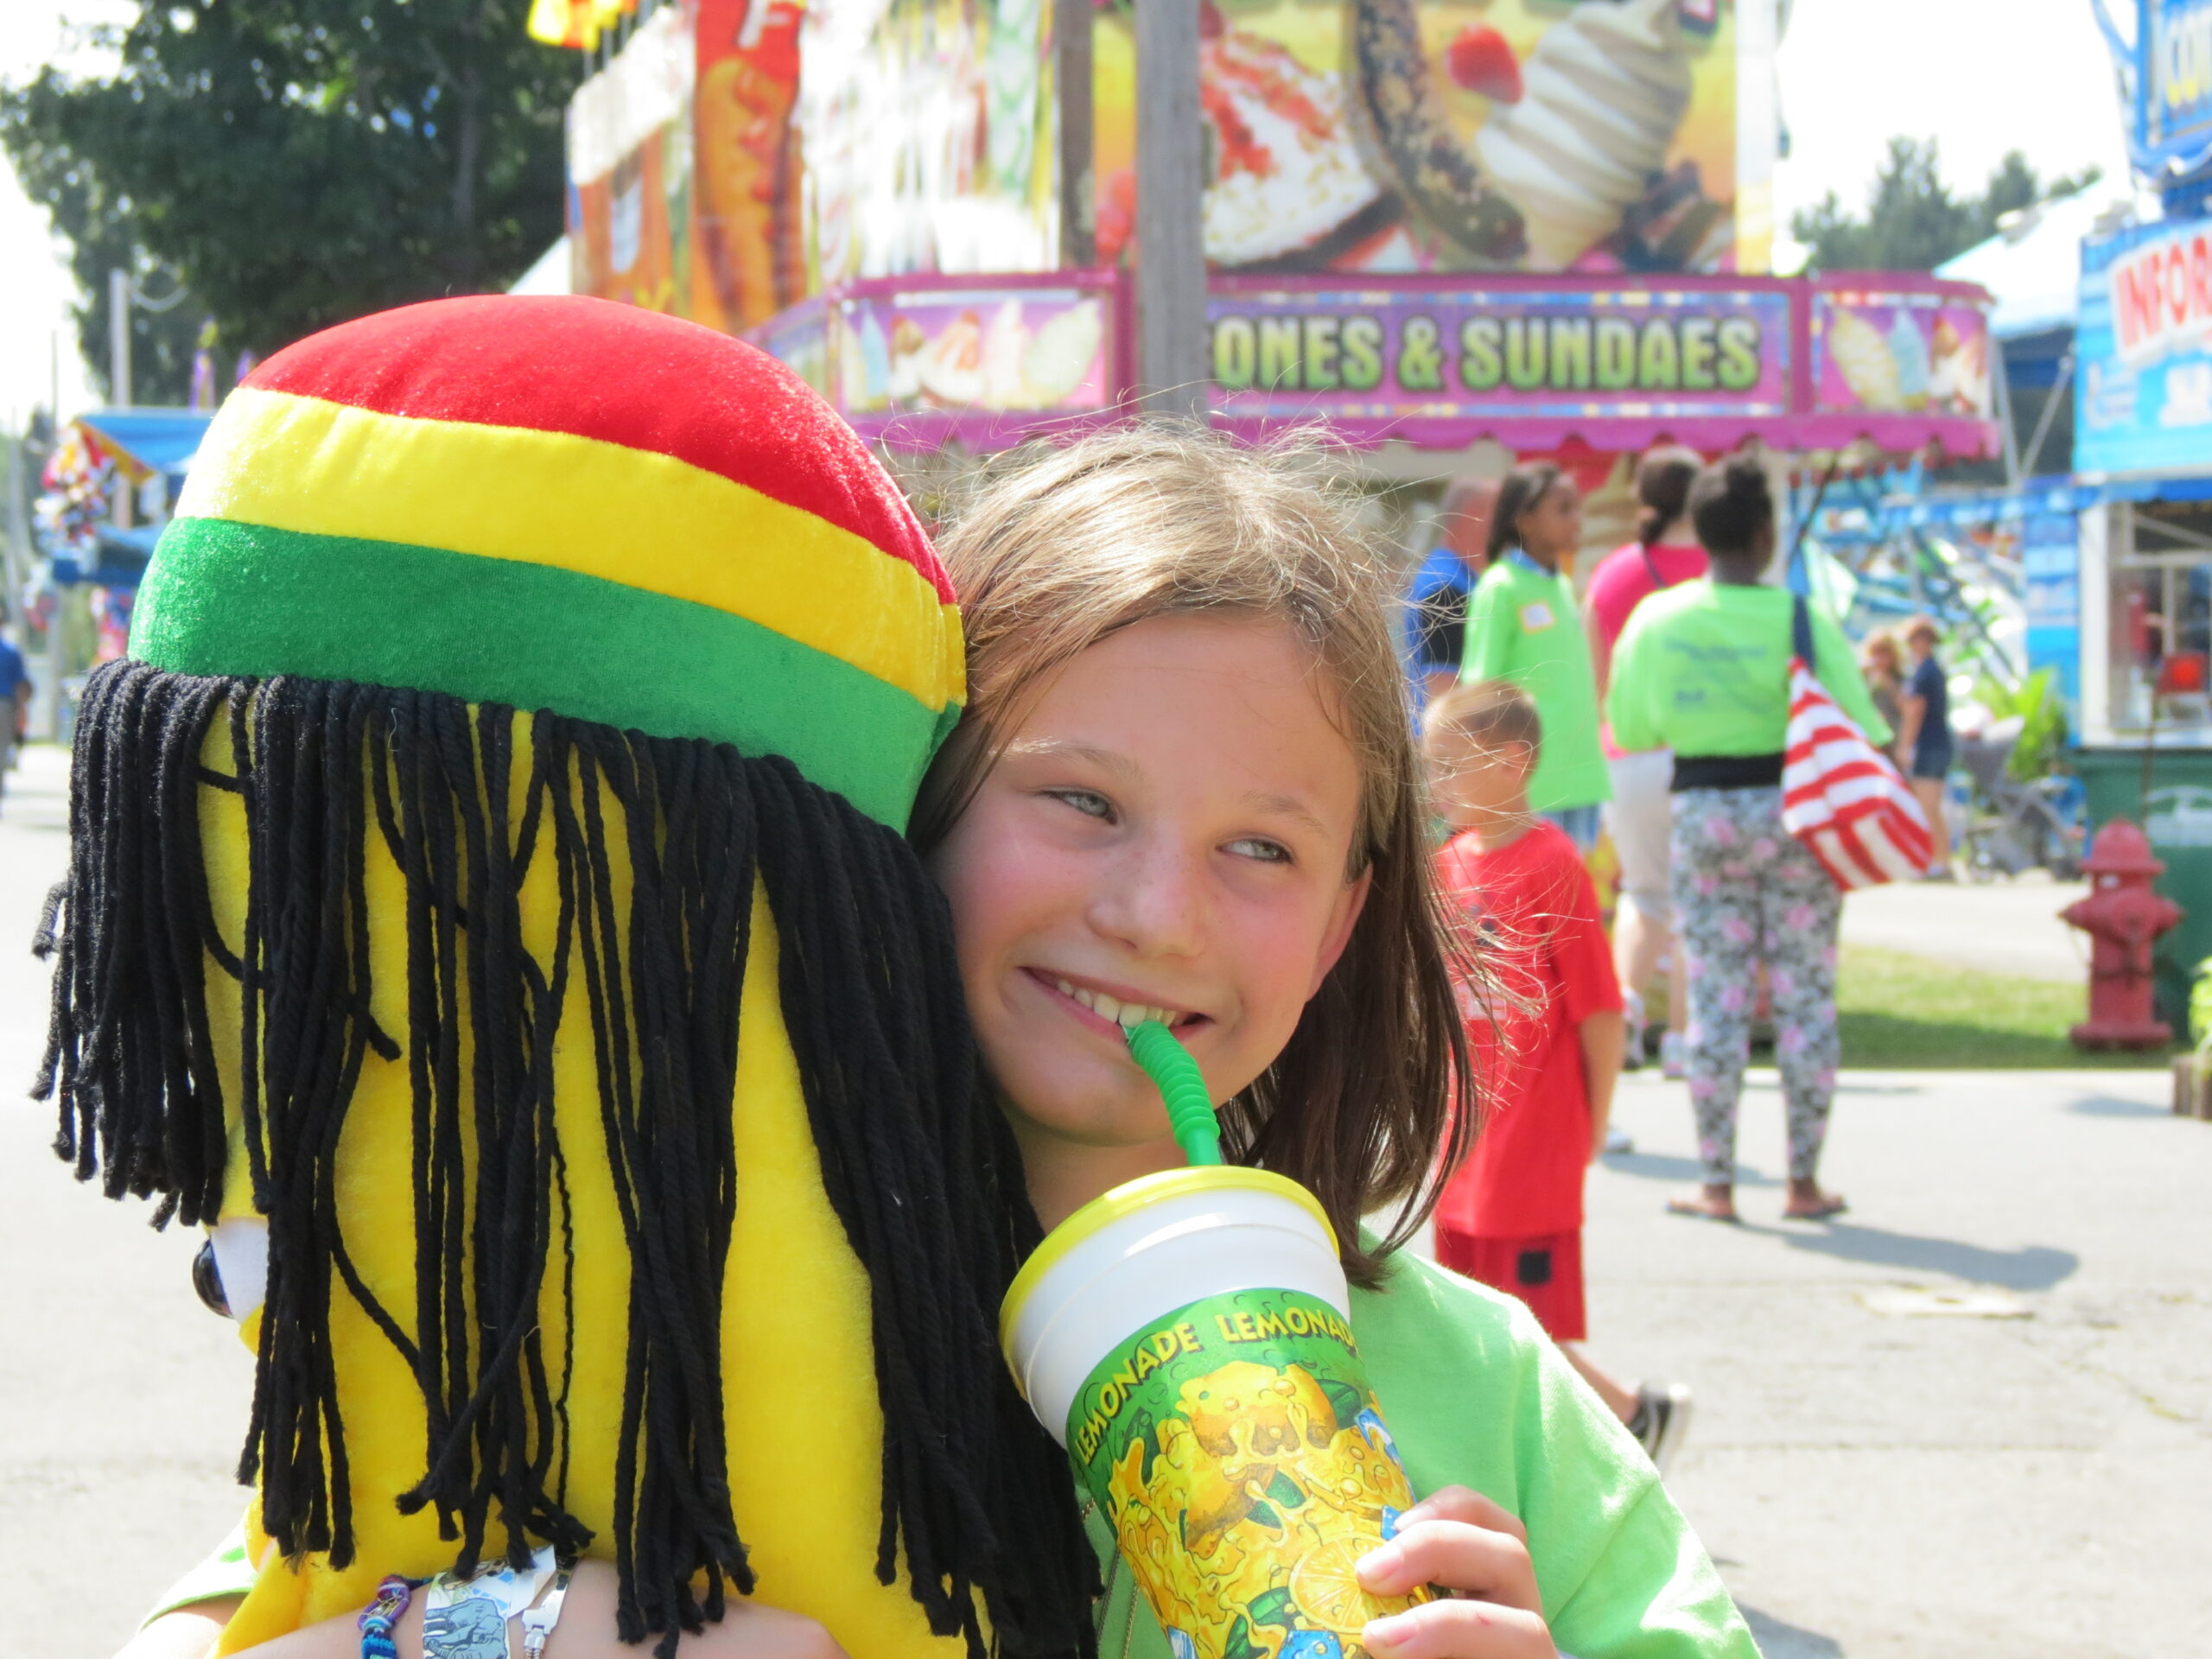 A young child holds a stuffed prize and sips a lemonade at a fairground. In kind donations to Astor Services make such joy possible.